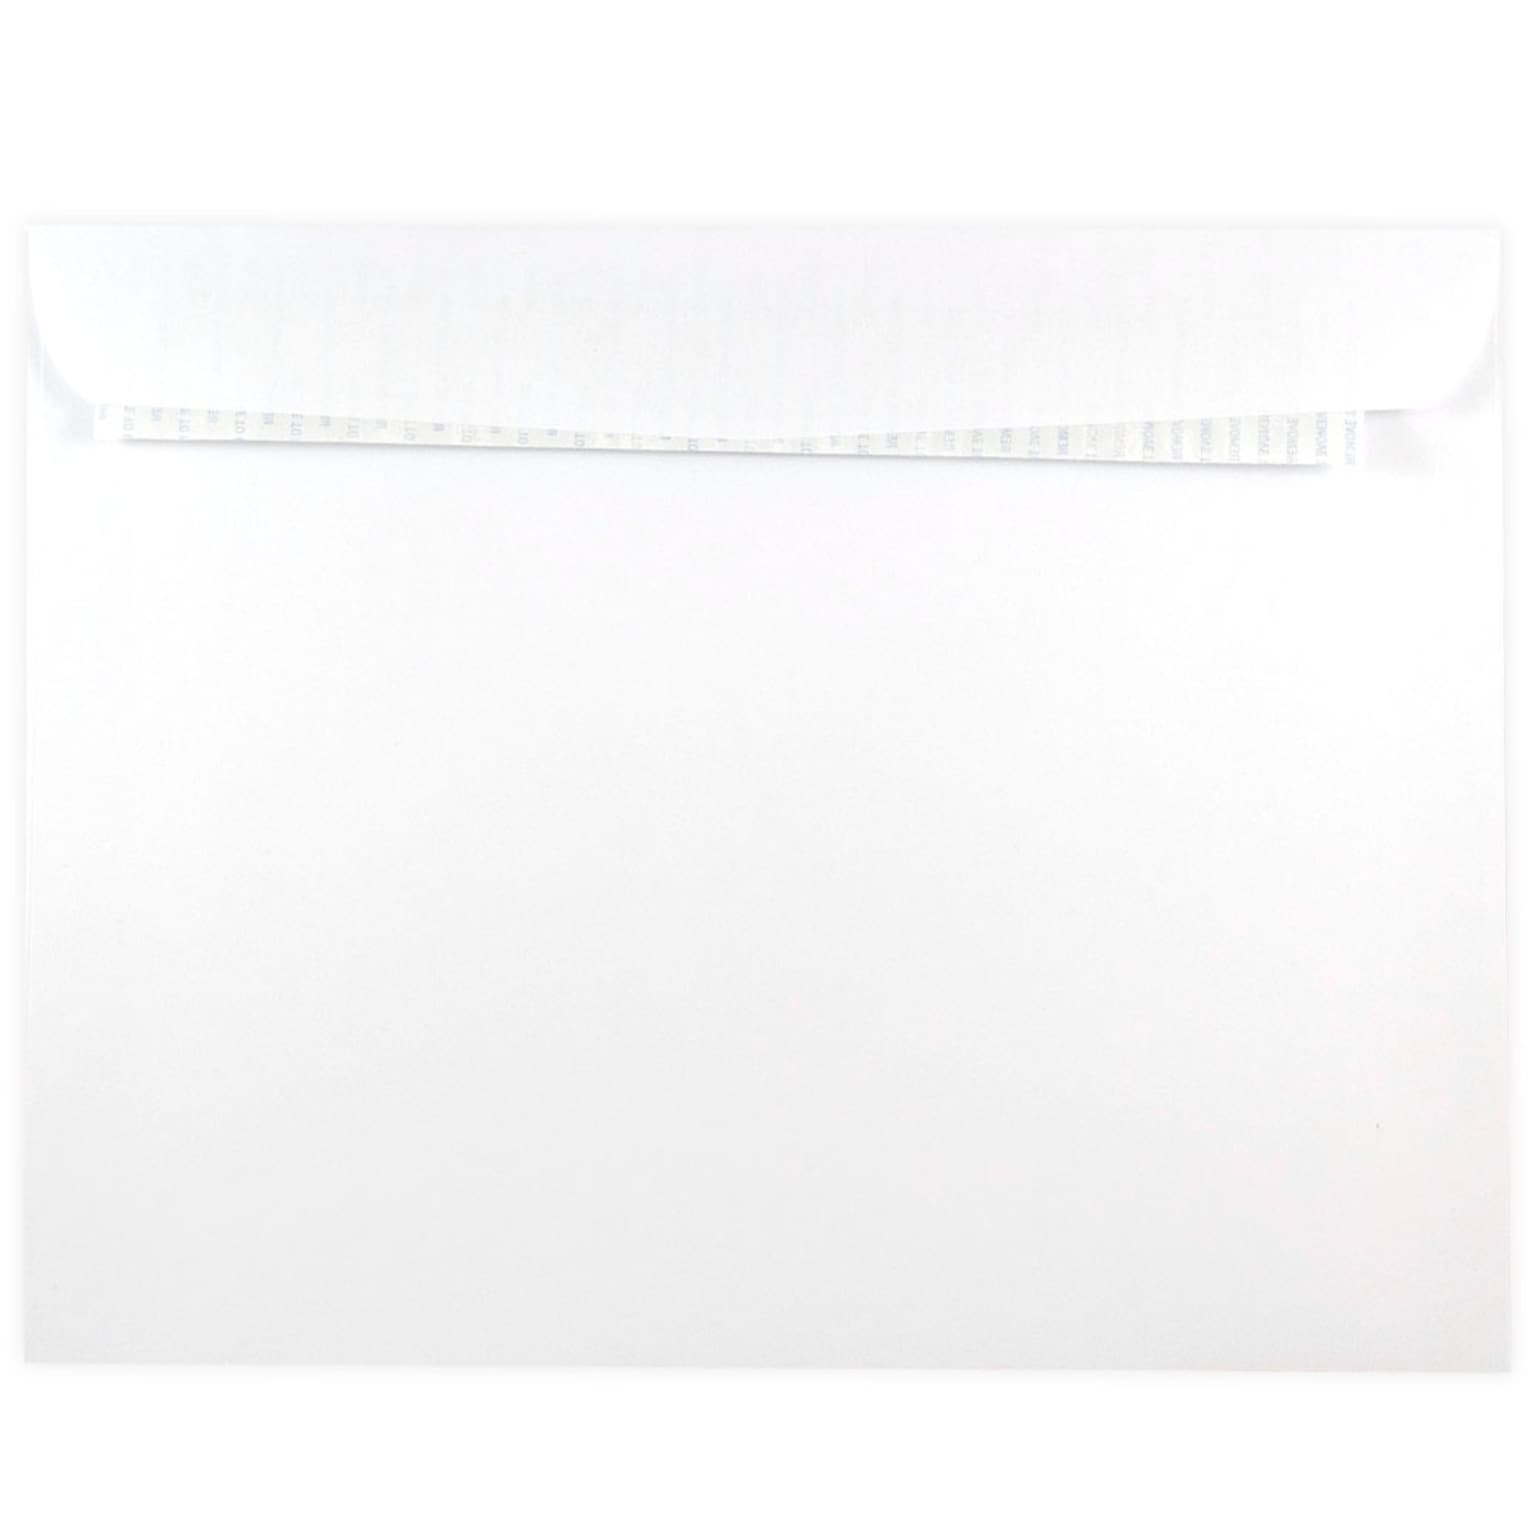 LUX Moistenable Glue Security Tinted #10 Double Window Payroll Envelope, 4 1/8 x 9 1/2, White, 50/Pack (10DW-24W-50)